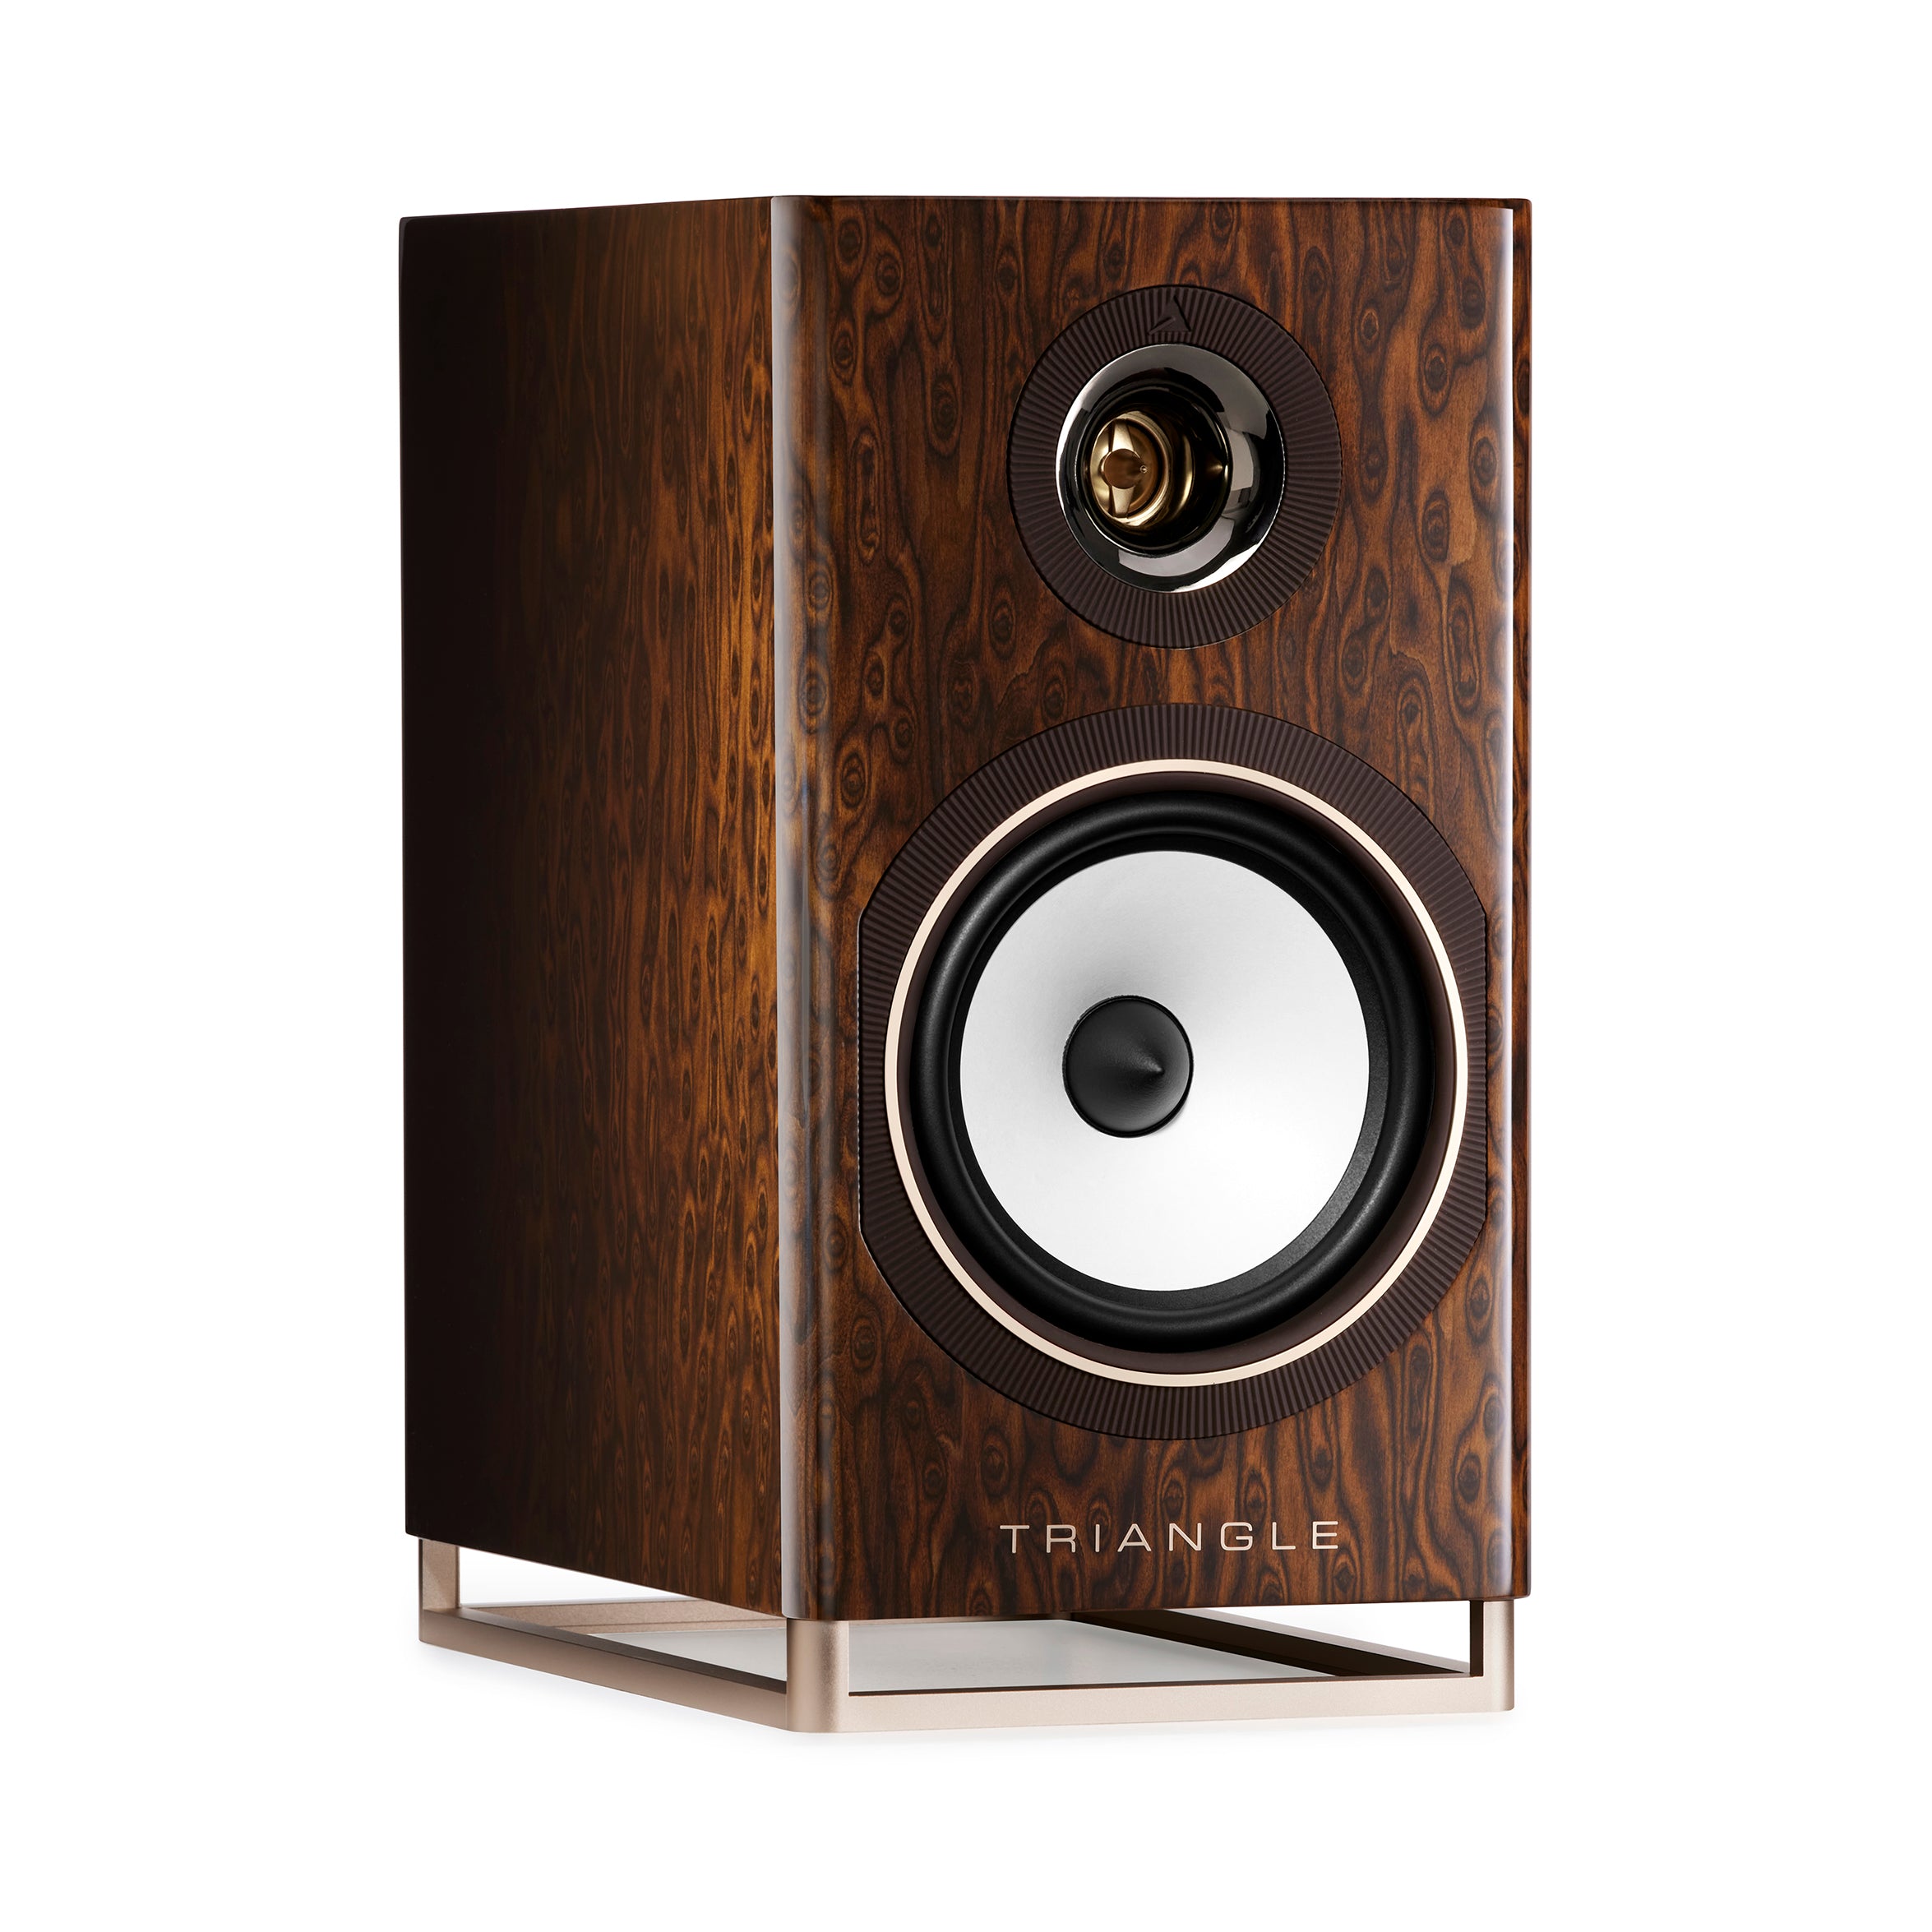 triangle-capella-enceinte-active-wifi-bluetooth-haut-de-gamme-stereo-hub-wisa-streaming-musique-pictures-packshot-nebuleuse-brune-brown-nebuleuse-3